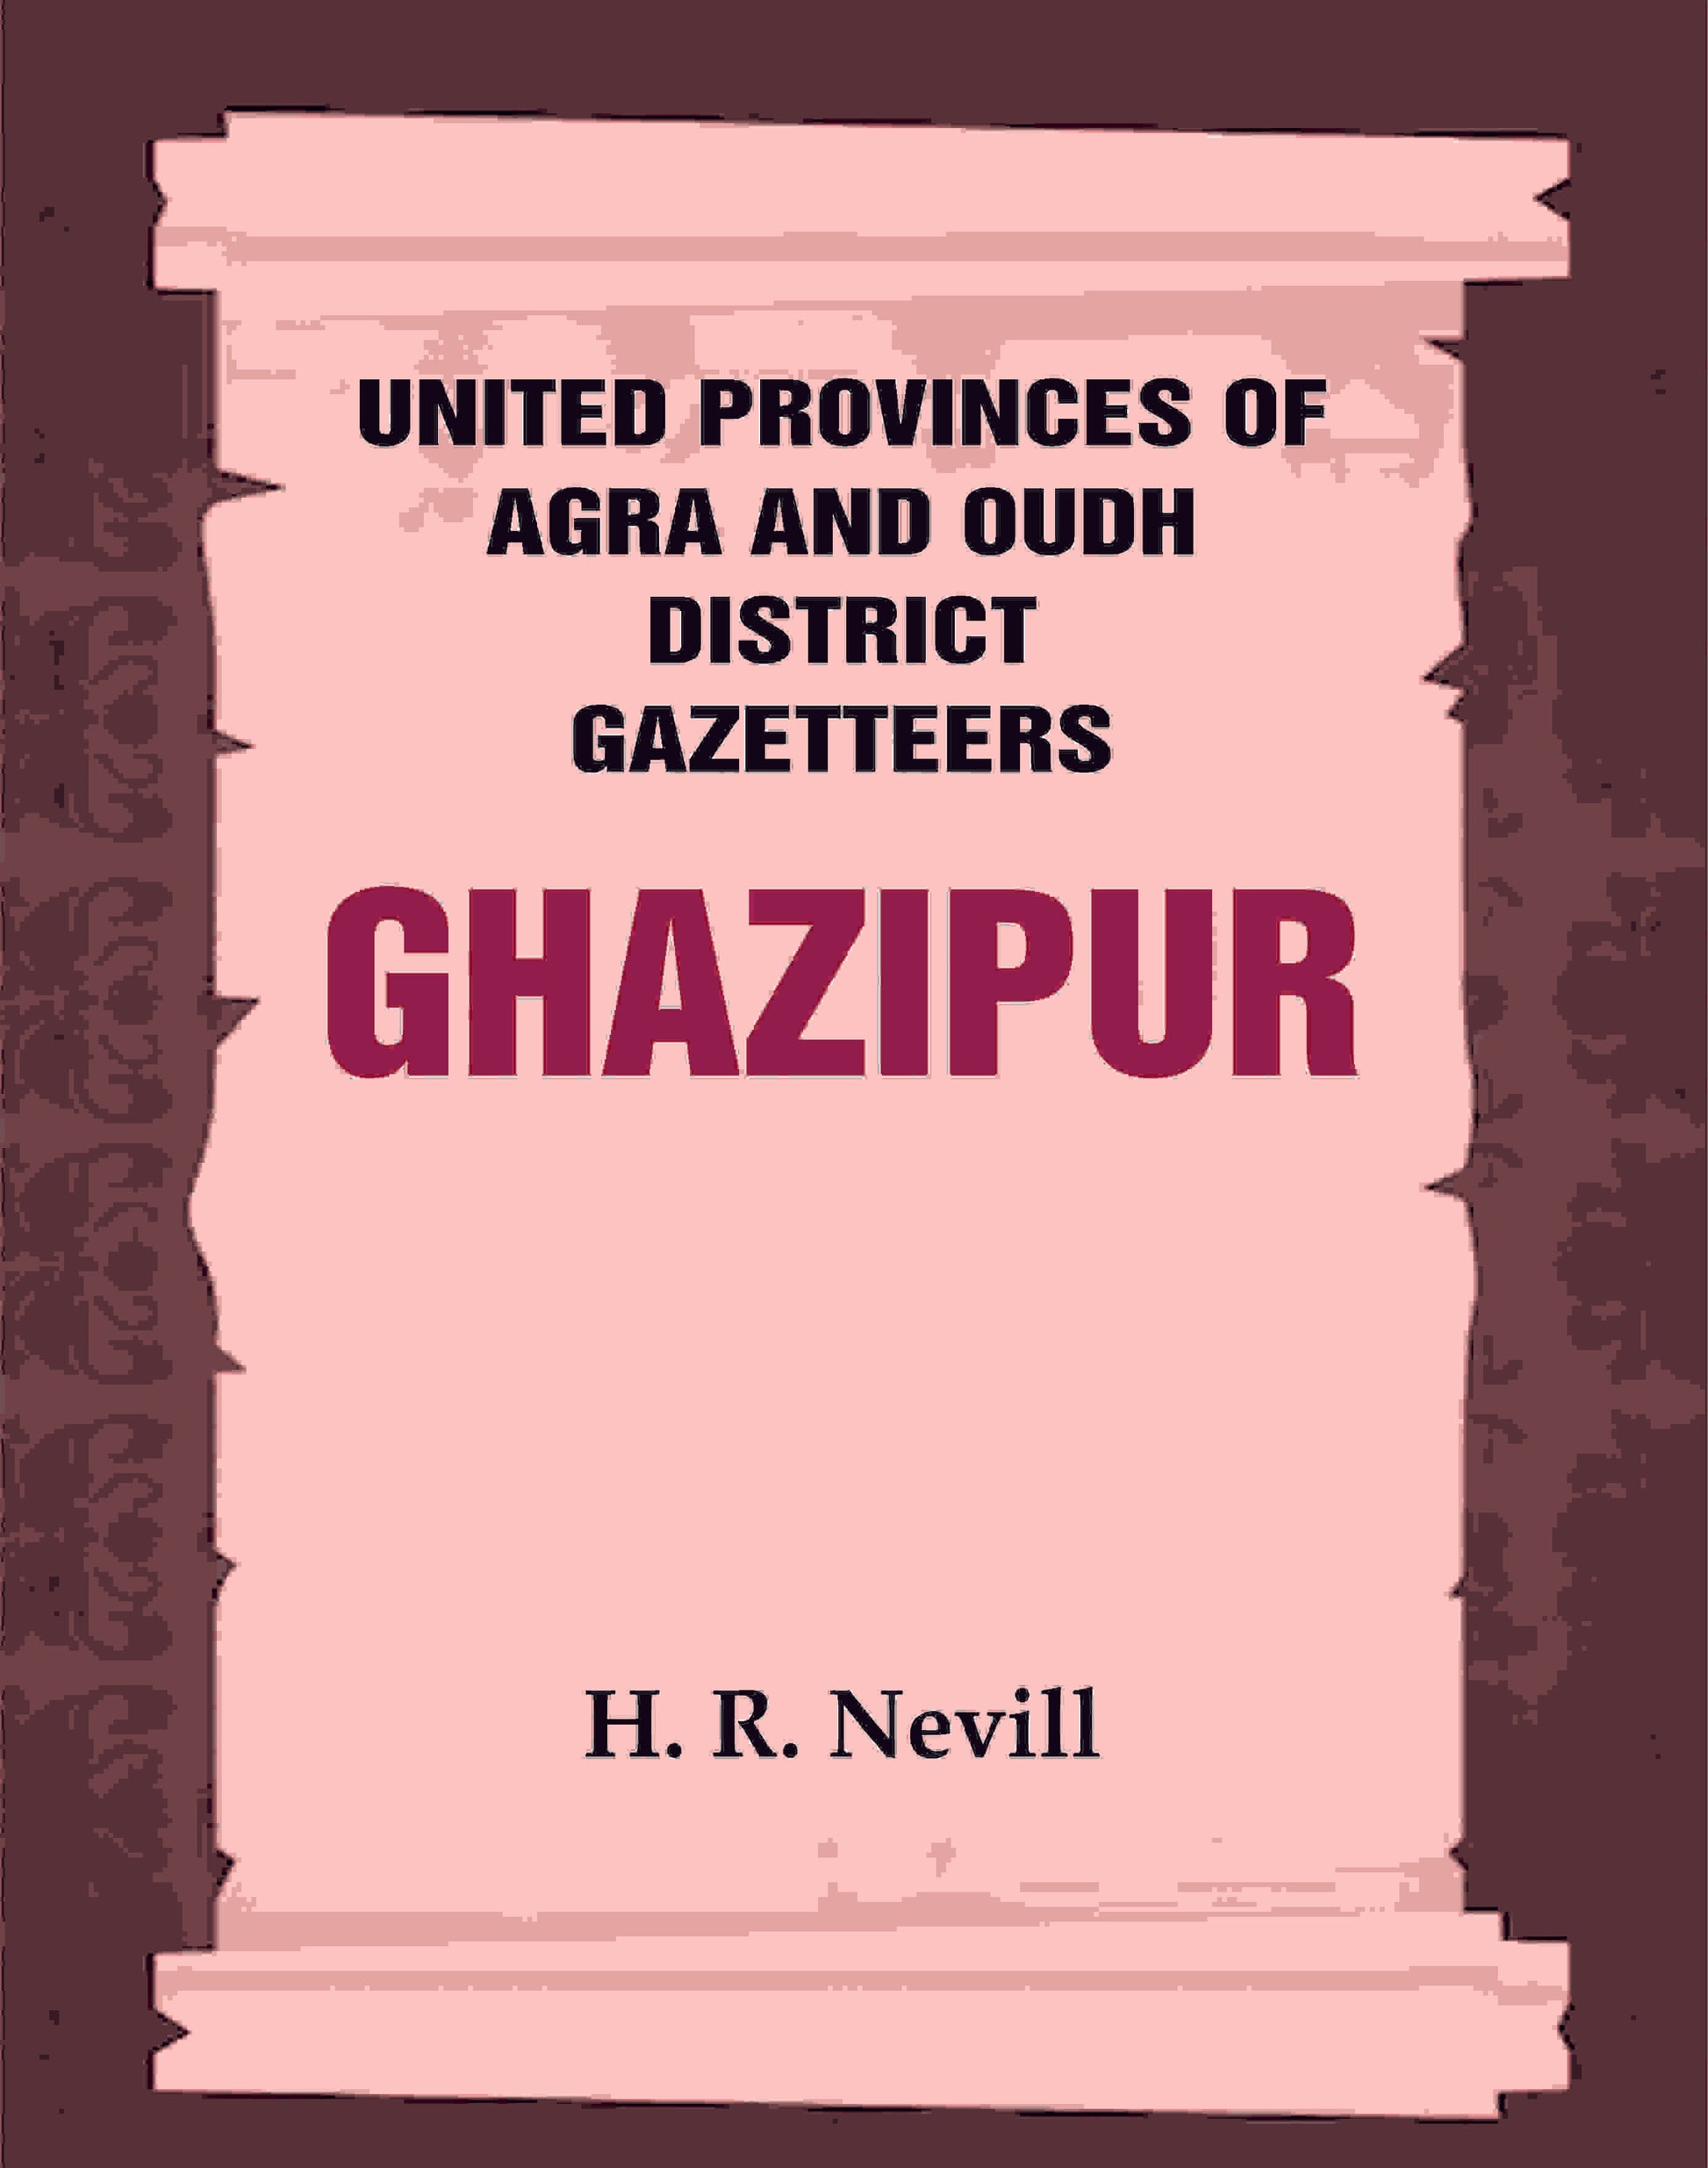 United Provinces of Agra and Oudh District Gazetteers: Ghazipur